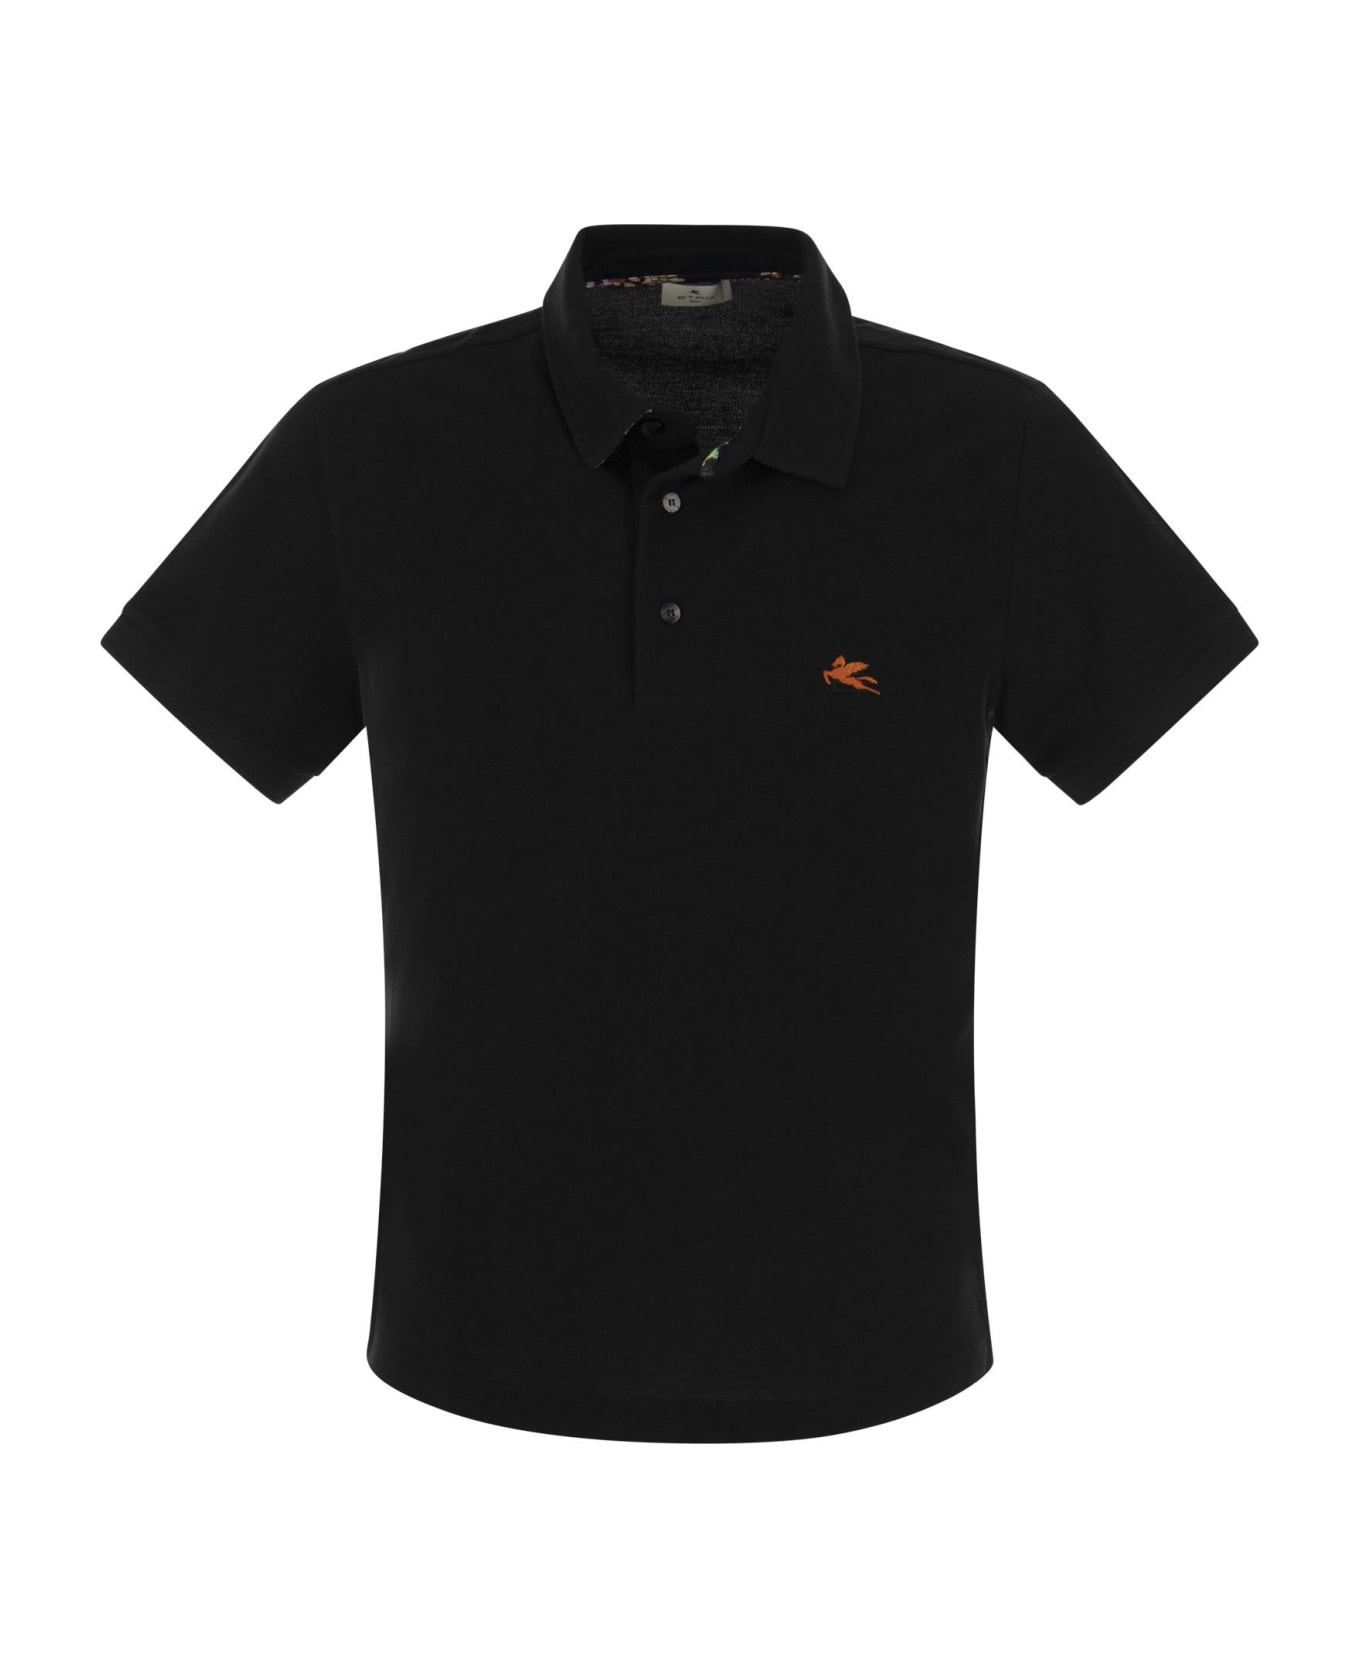 Etro Embroidered Logo Polo Shirt - Black ポロシャツ